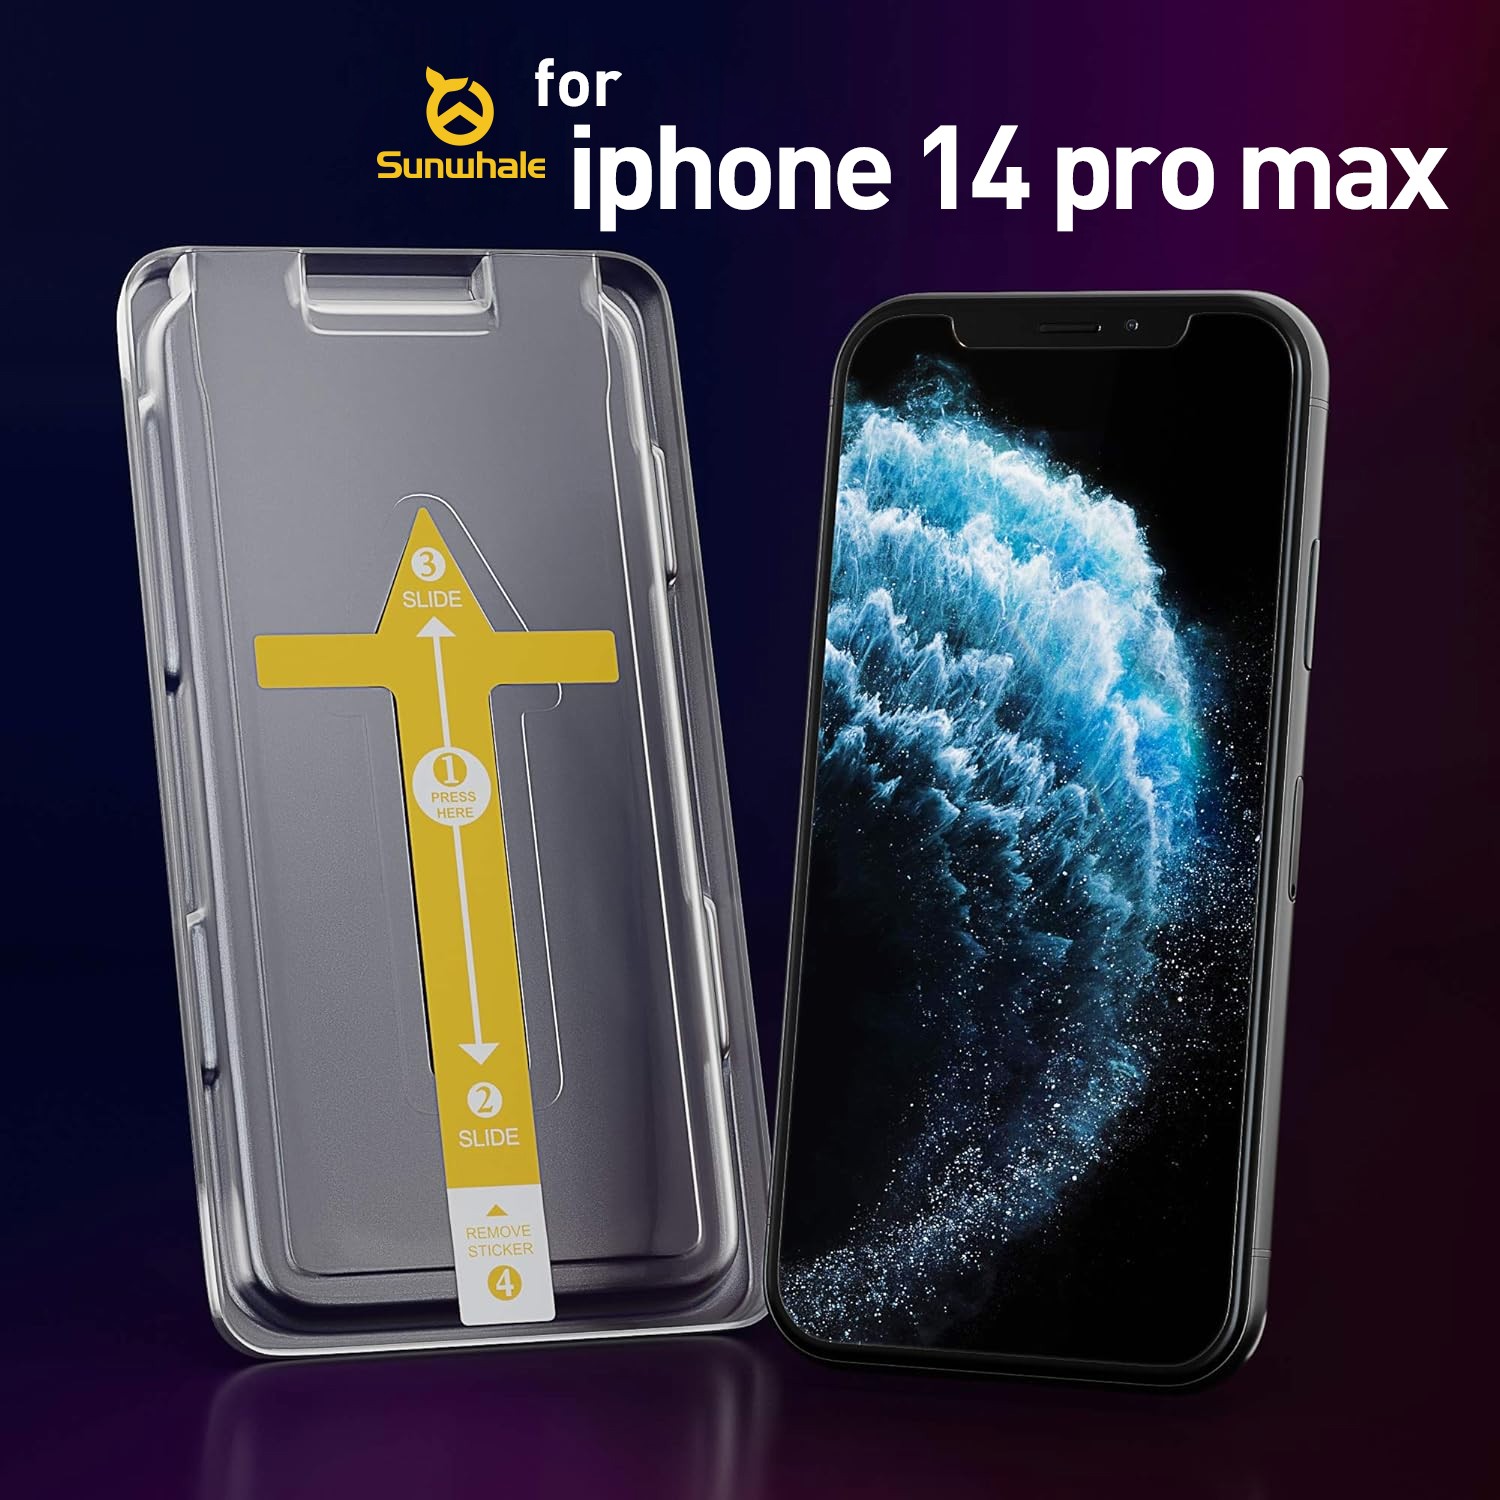 Mobile-Phone-Accessories-Sunwhale-for-iPhone-14-pro-max-Screen-Protector-Auto-Alignment-Kit-13